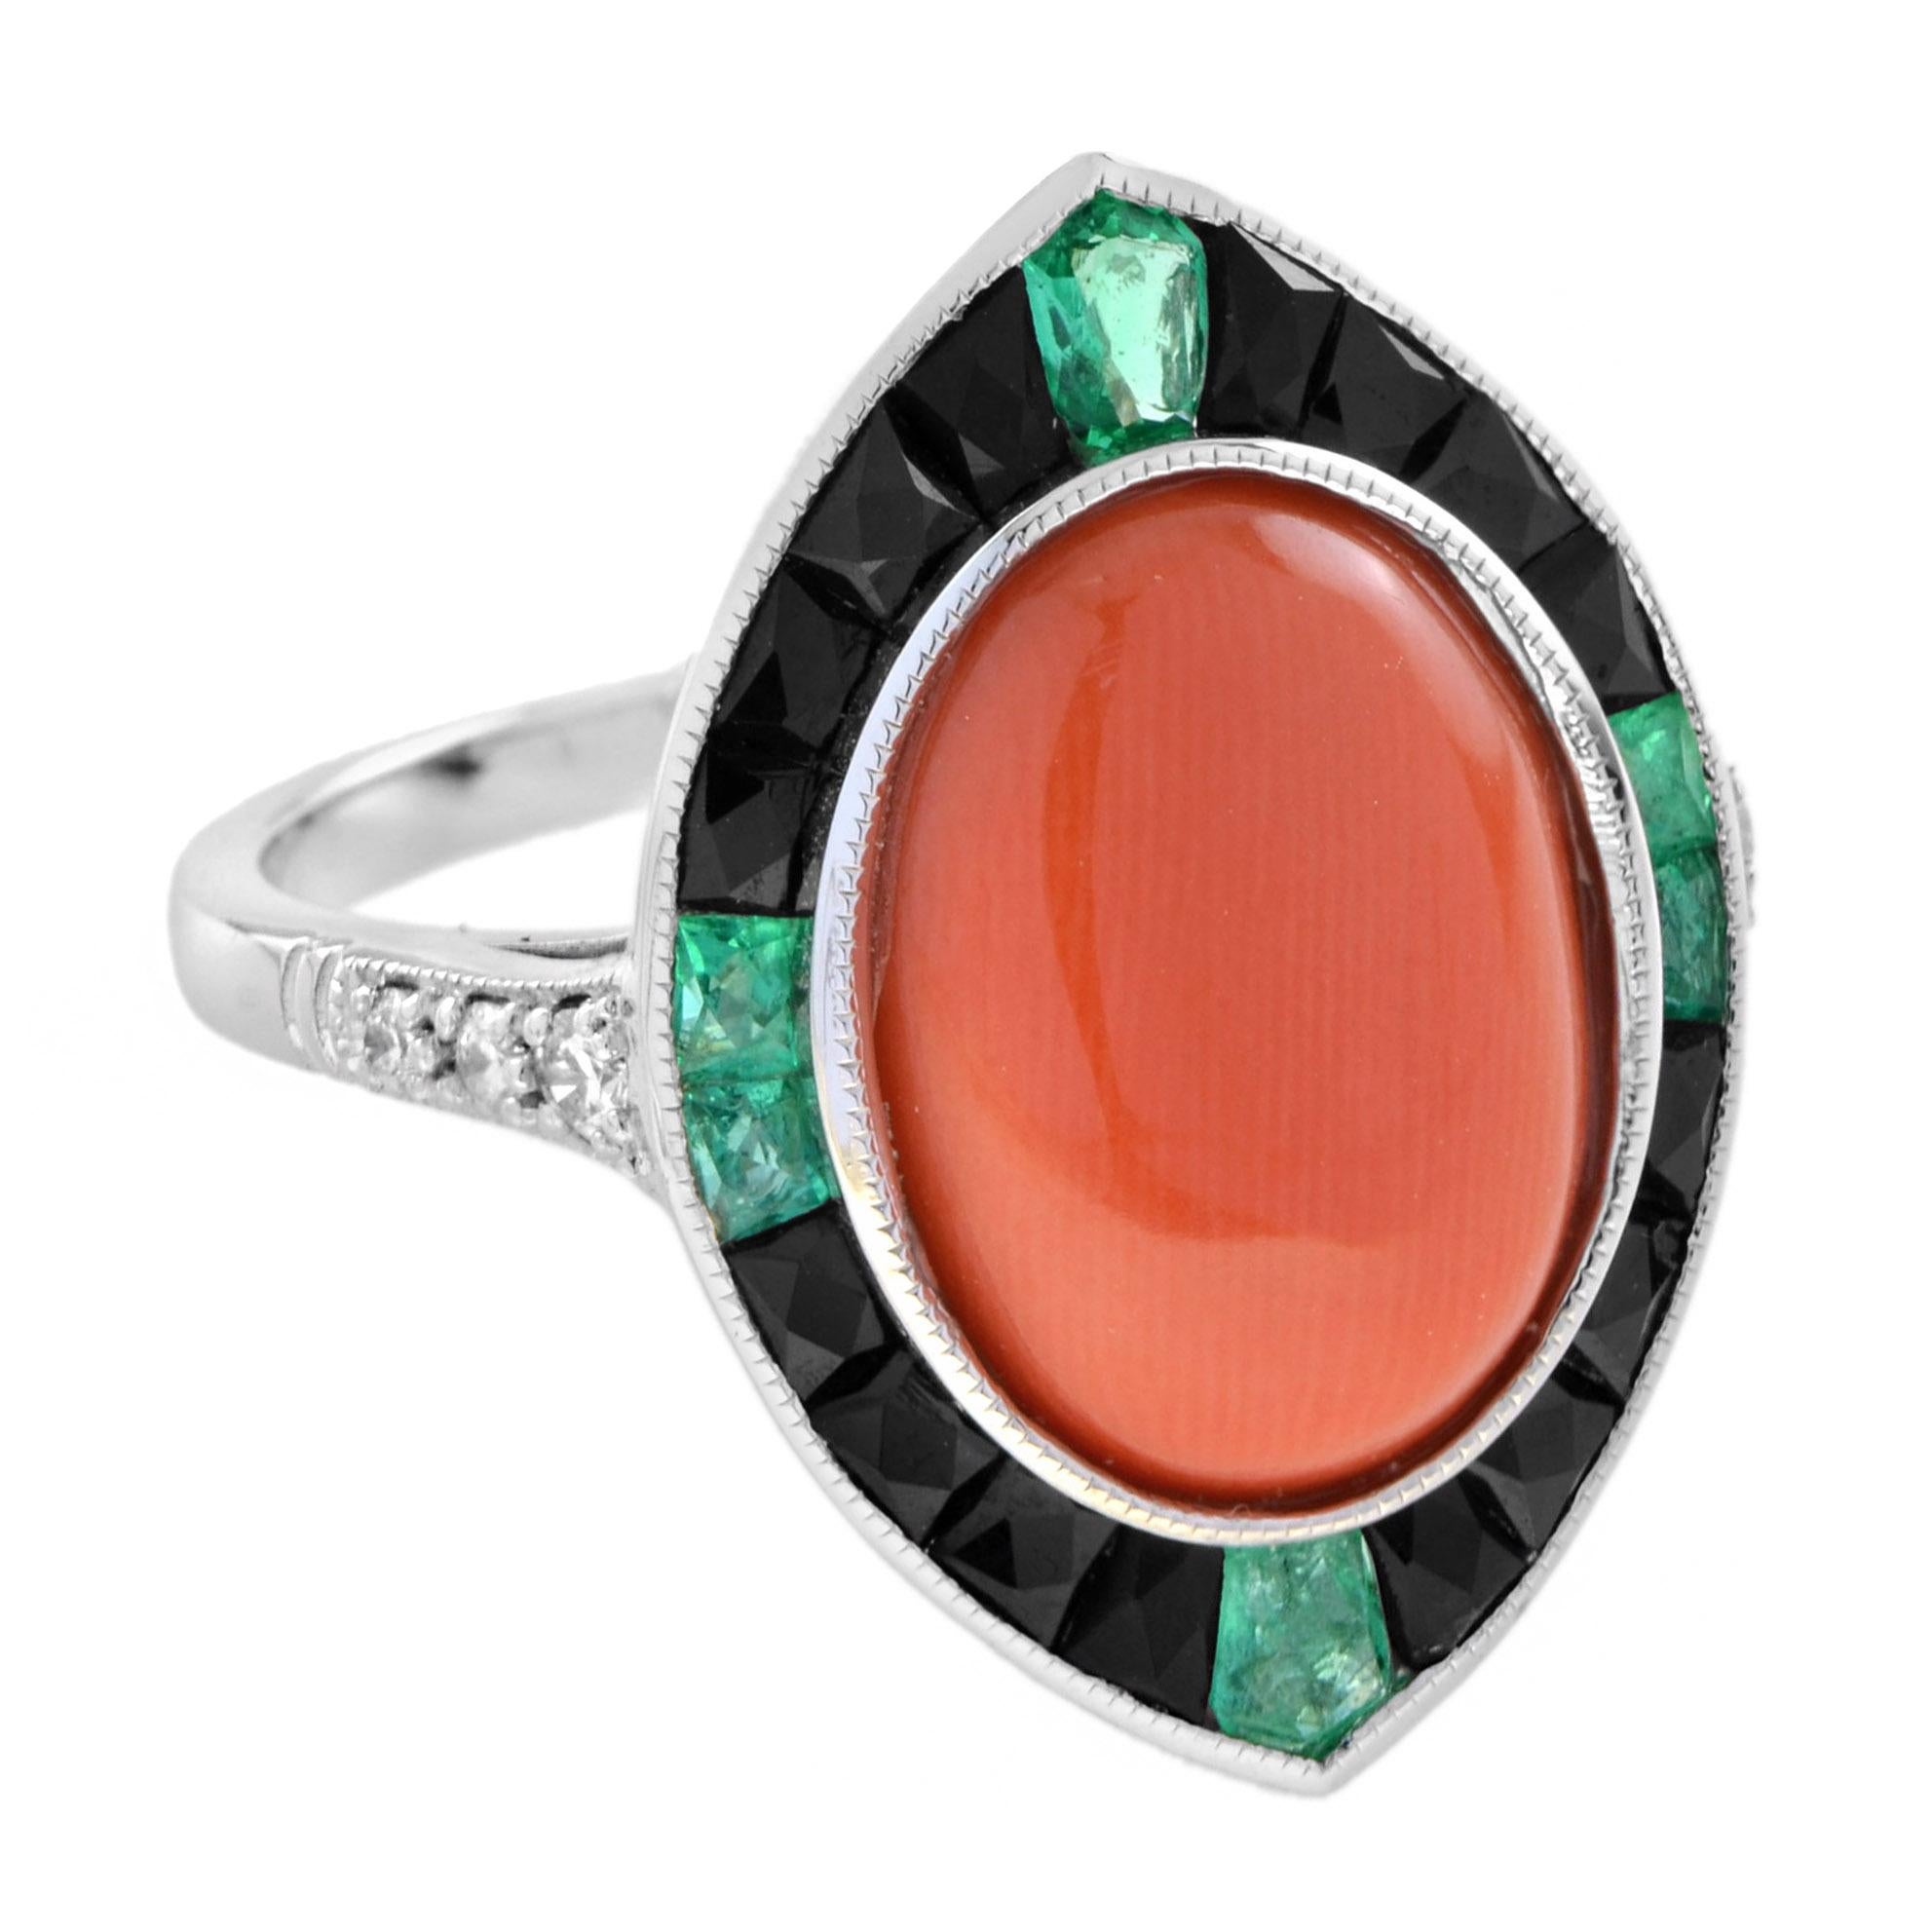 Women's or Men's 4.05 Ct. Coral Diamond Emerald Onyx Art Deco Style Cocktail Ring in White Gold